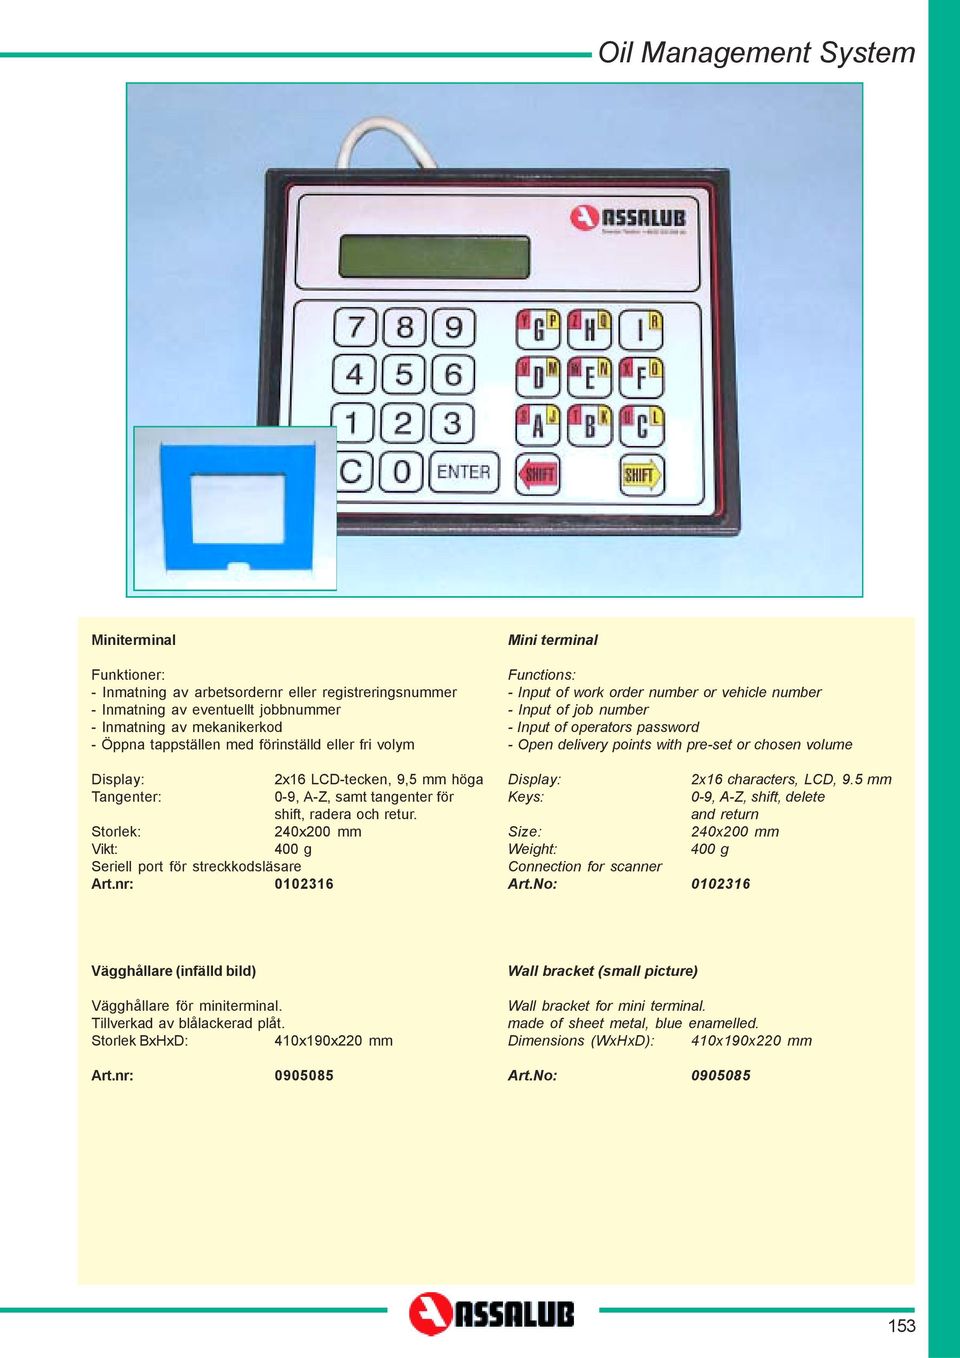 40x00 mm 400 g Mini terminal Functions: - Input of work order number or vehicle number - Input of job number - Input of operators password - Open delivery points with pre-set or chosen volume